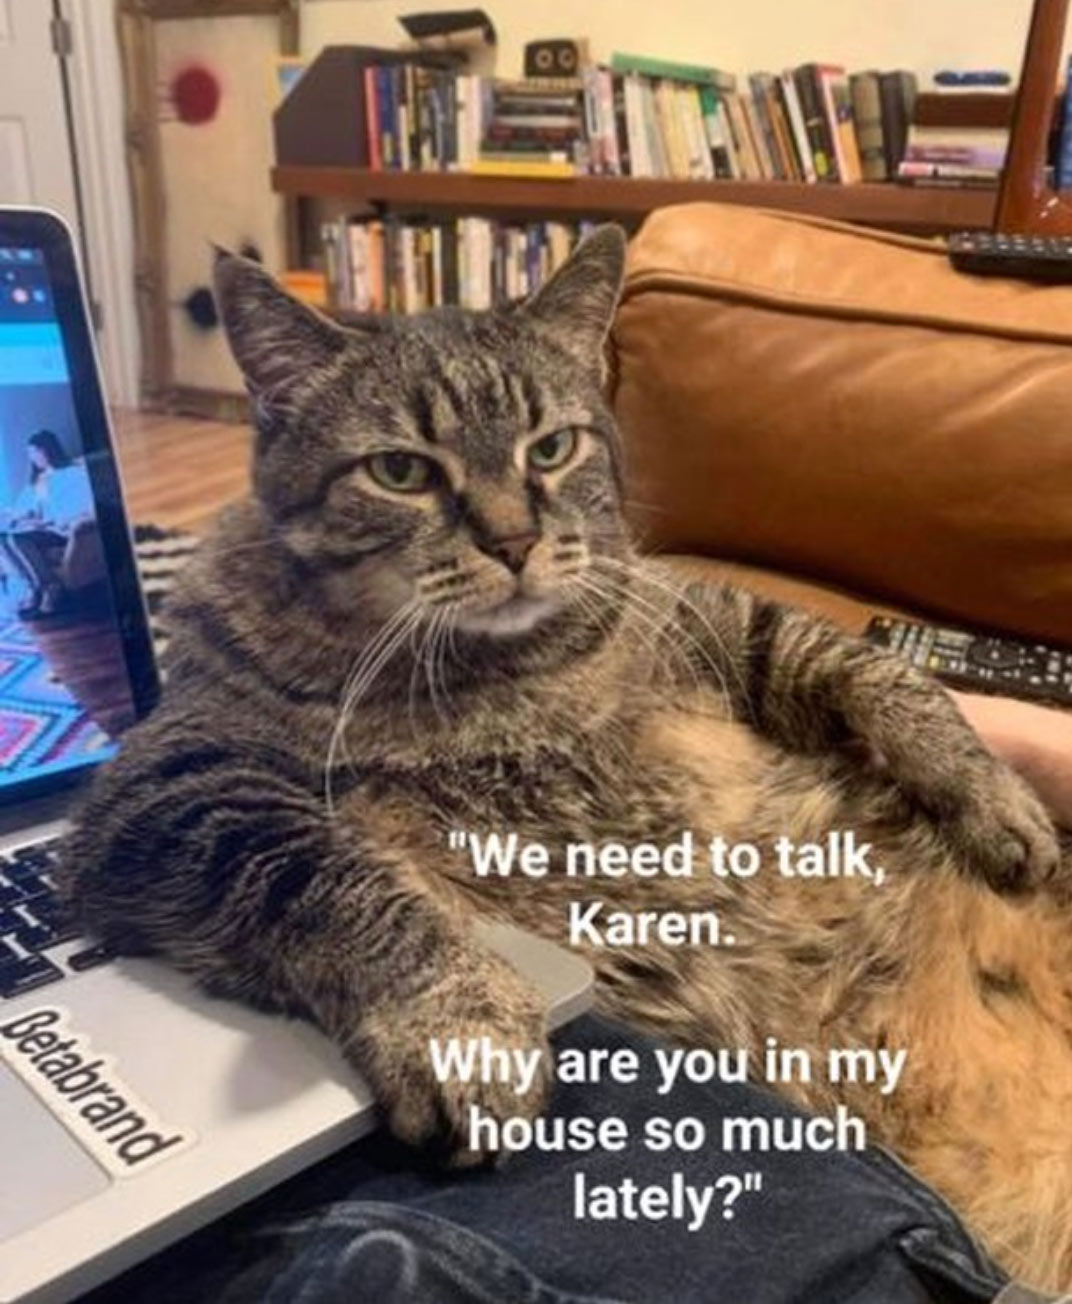 clean work memes - we need to talk karen - "We need to talk, Karen. Betabrand Why are you in my house so much lately?"